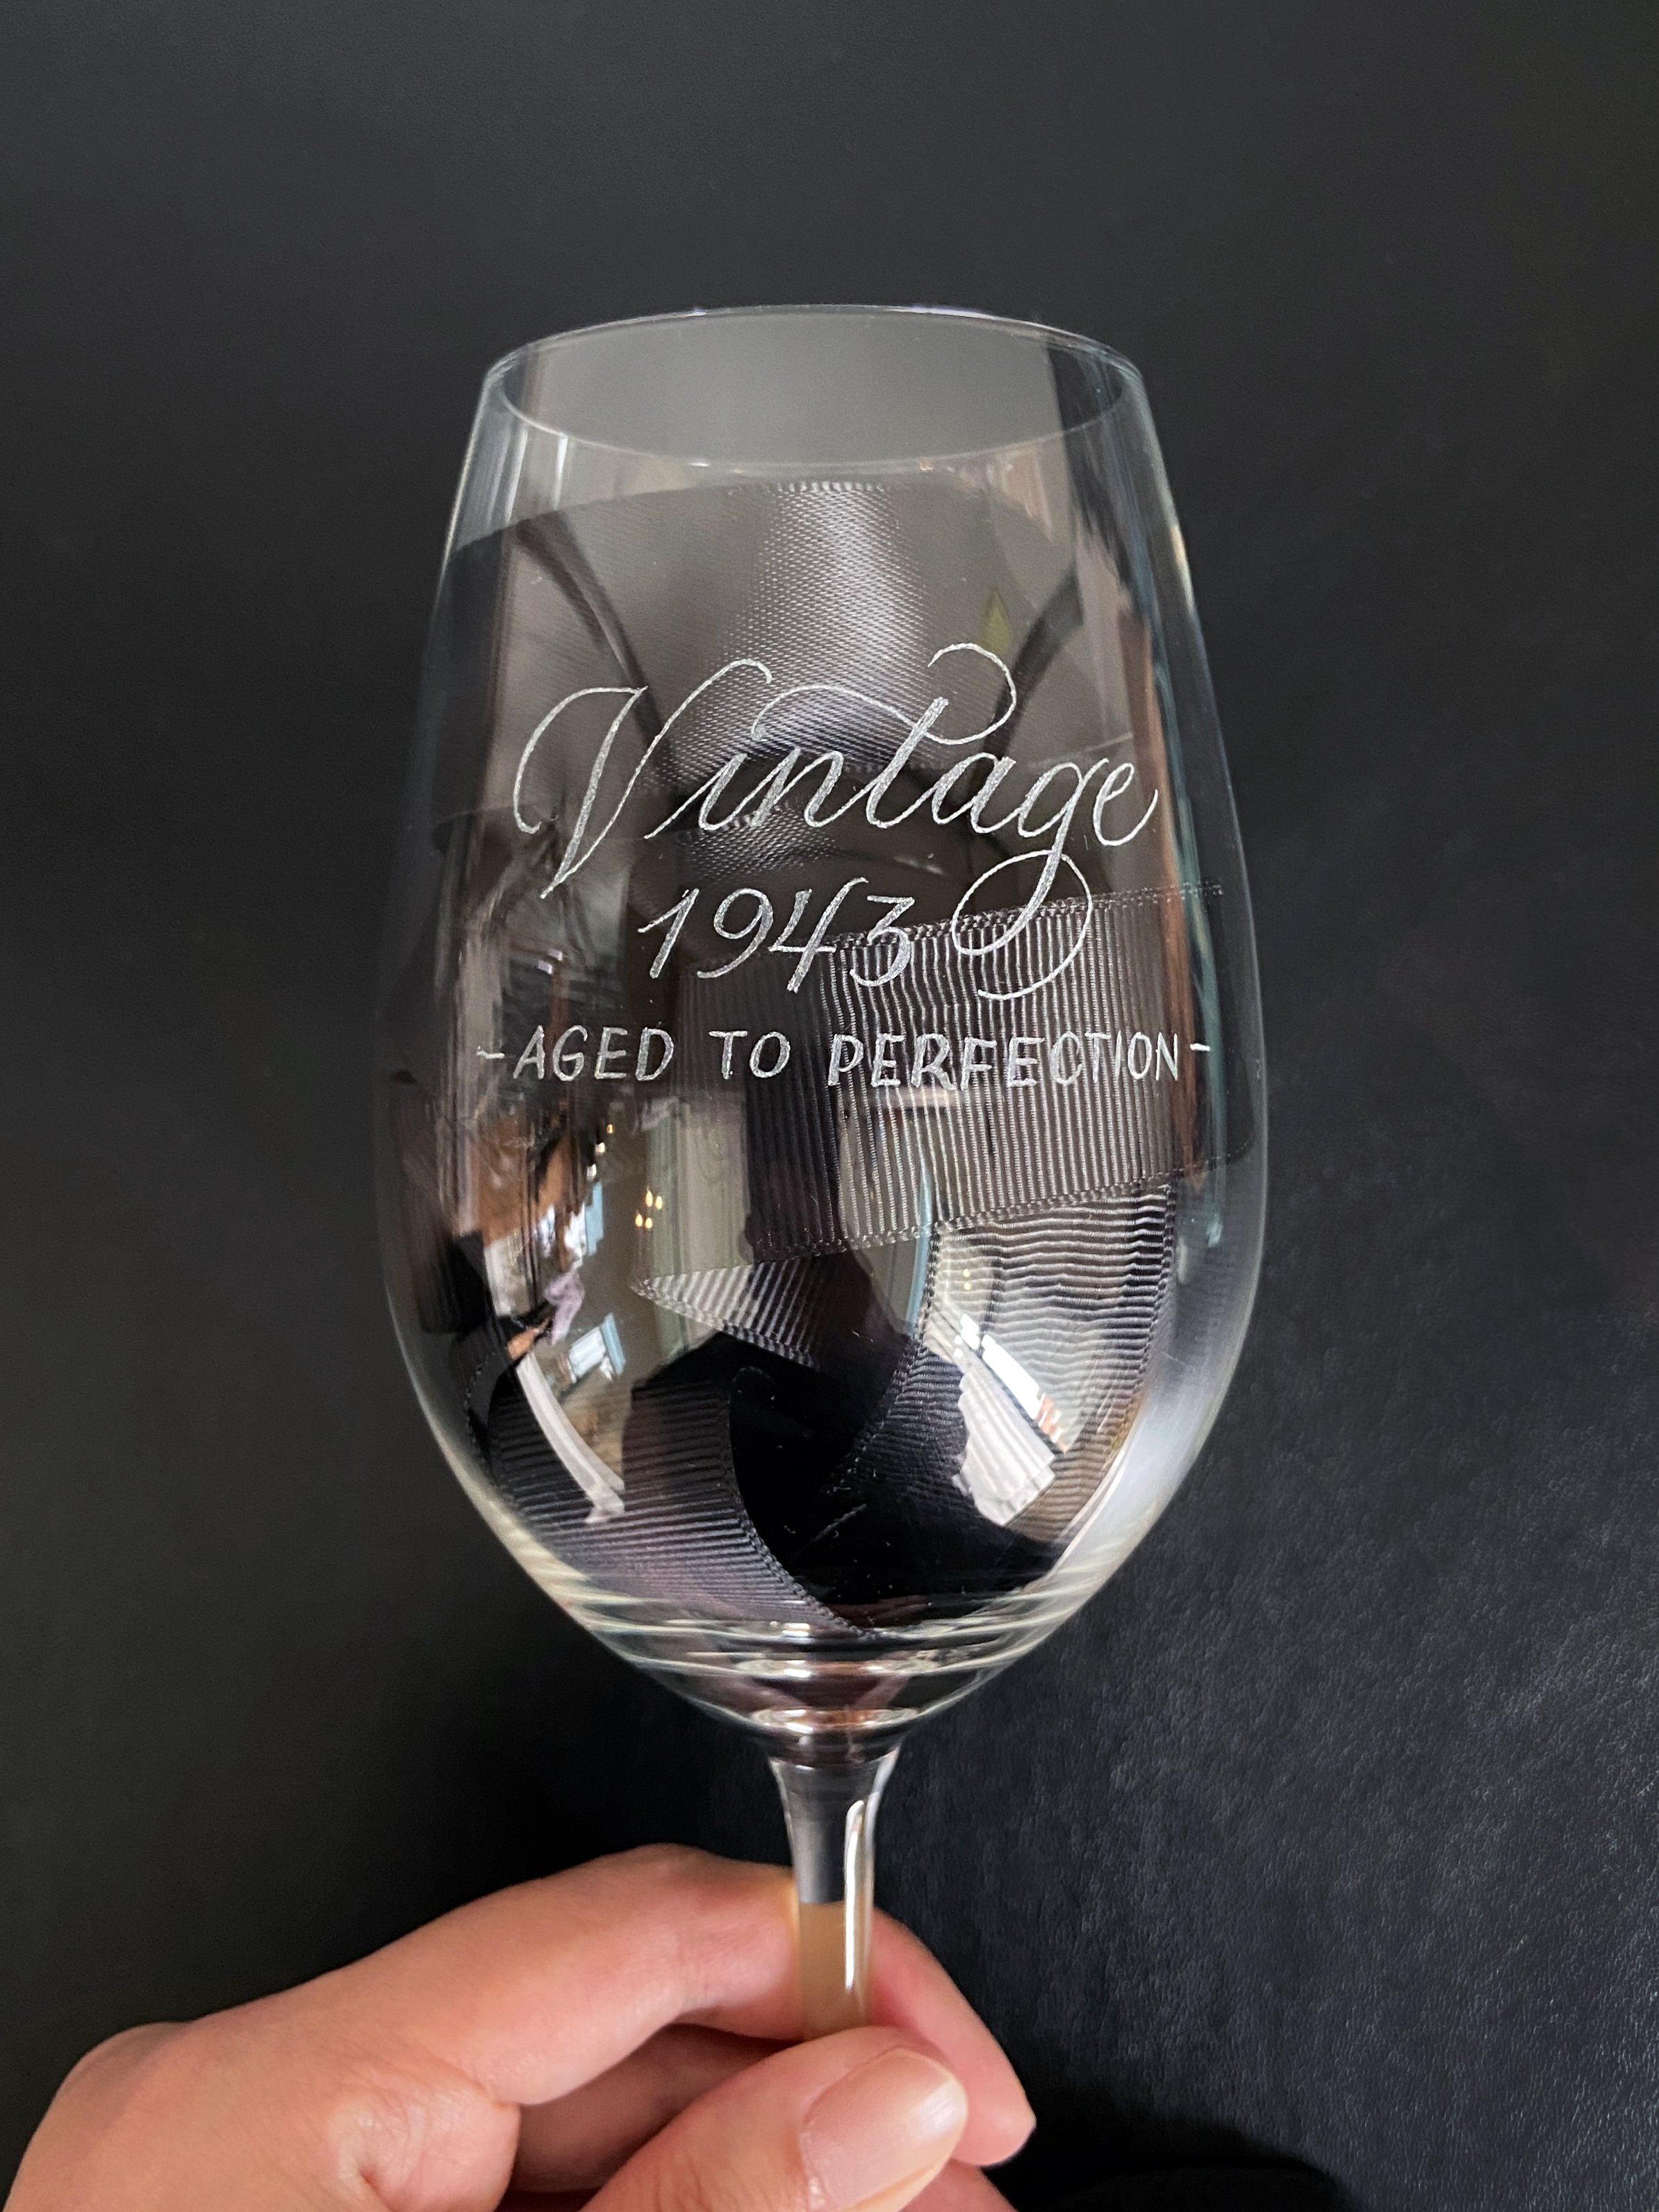 Vintage 1943 Aged to Perfection - Engraved Wine Glass